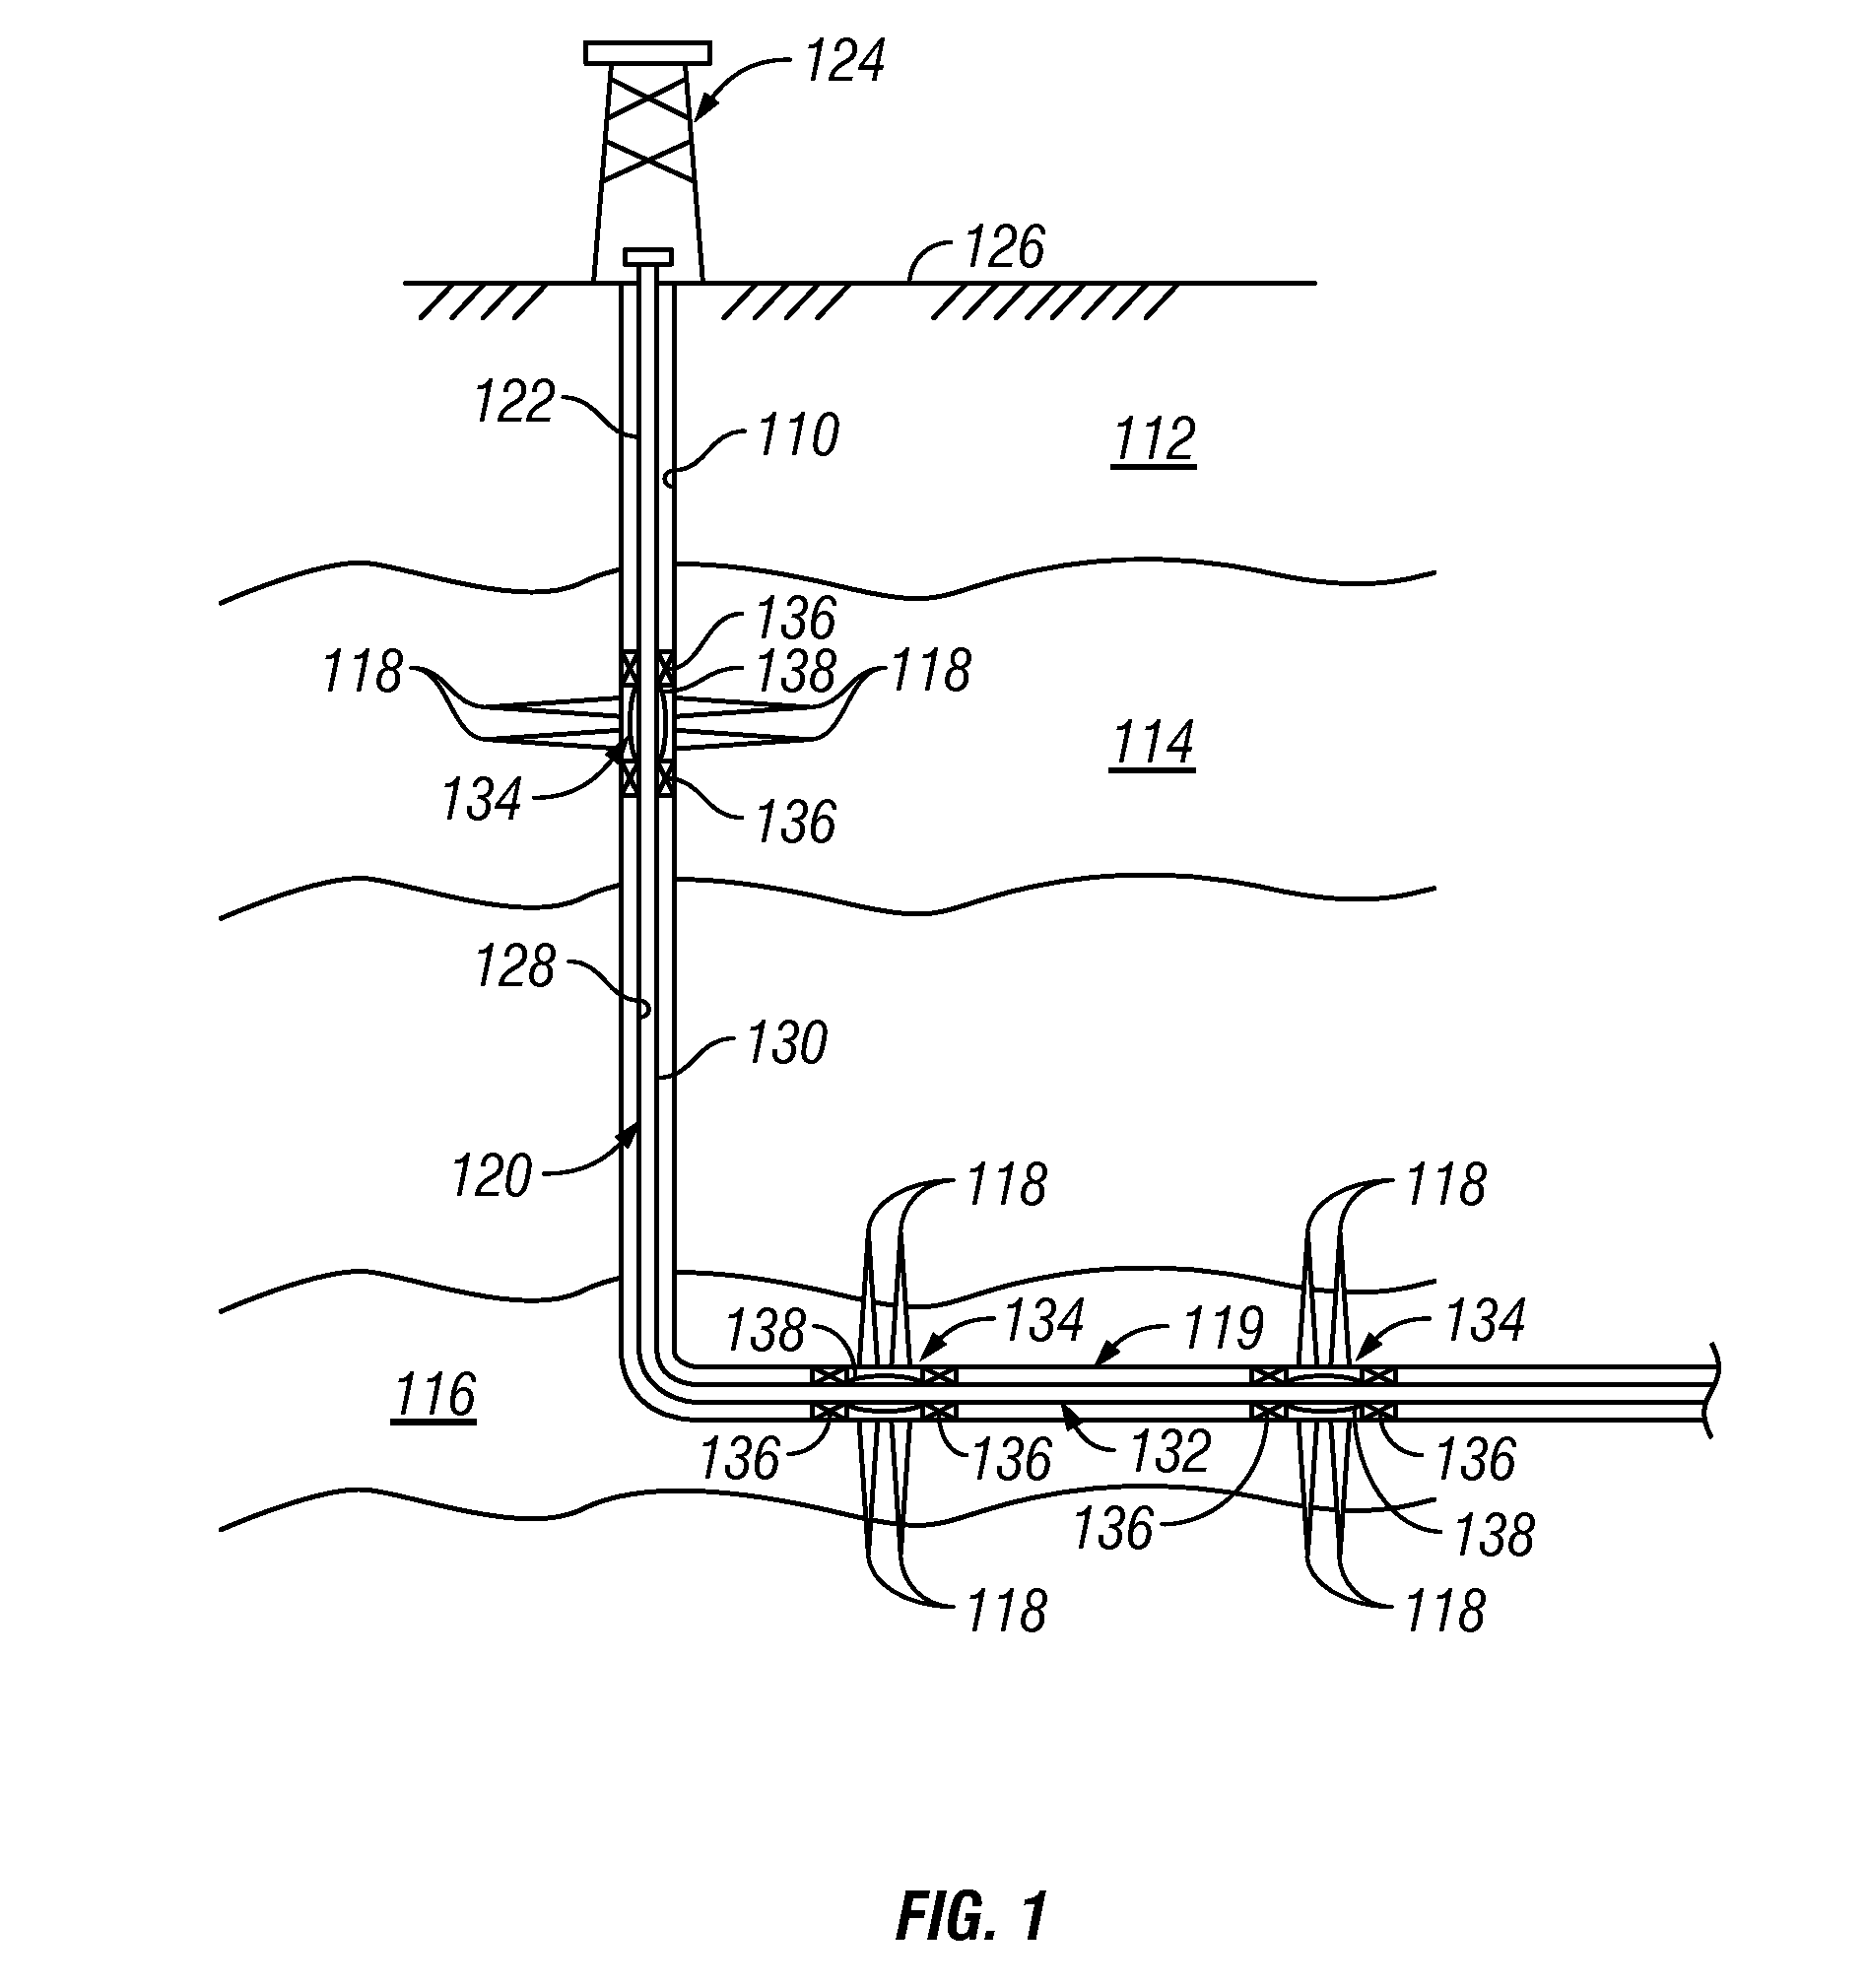 Method of Making a Flow Control Device That Reduces Flow of the Fluid When a Selected Property of the Fluid is in Selected Range